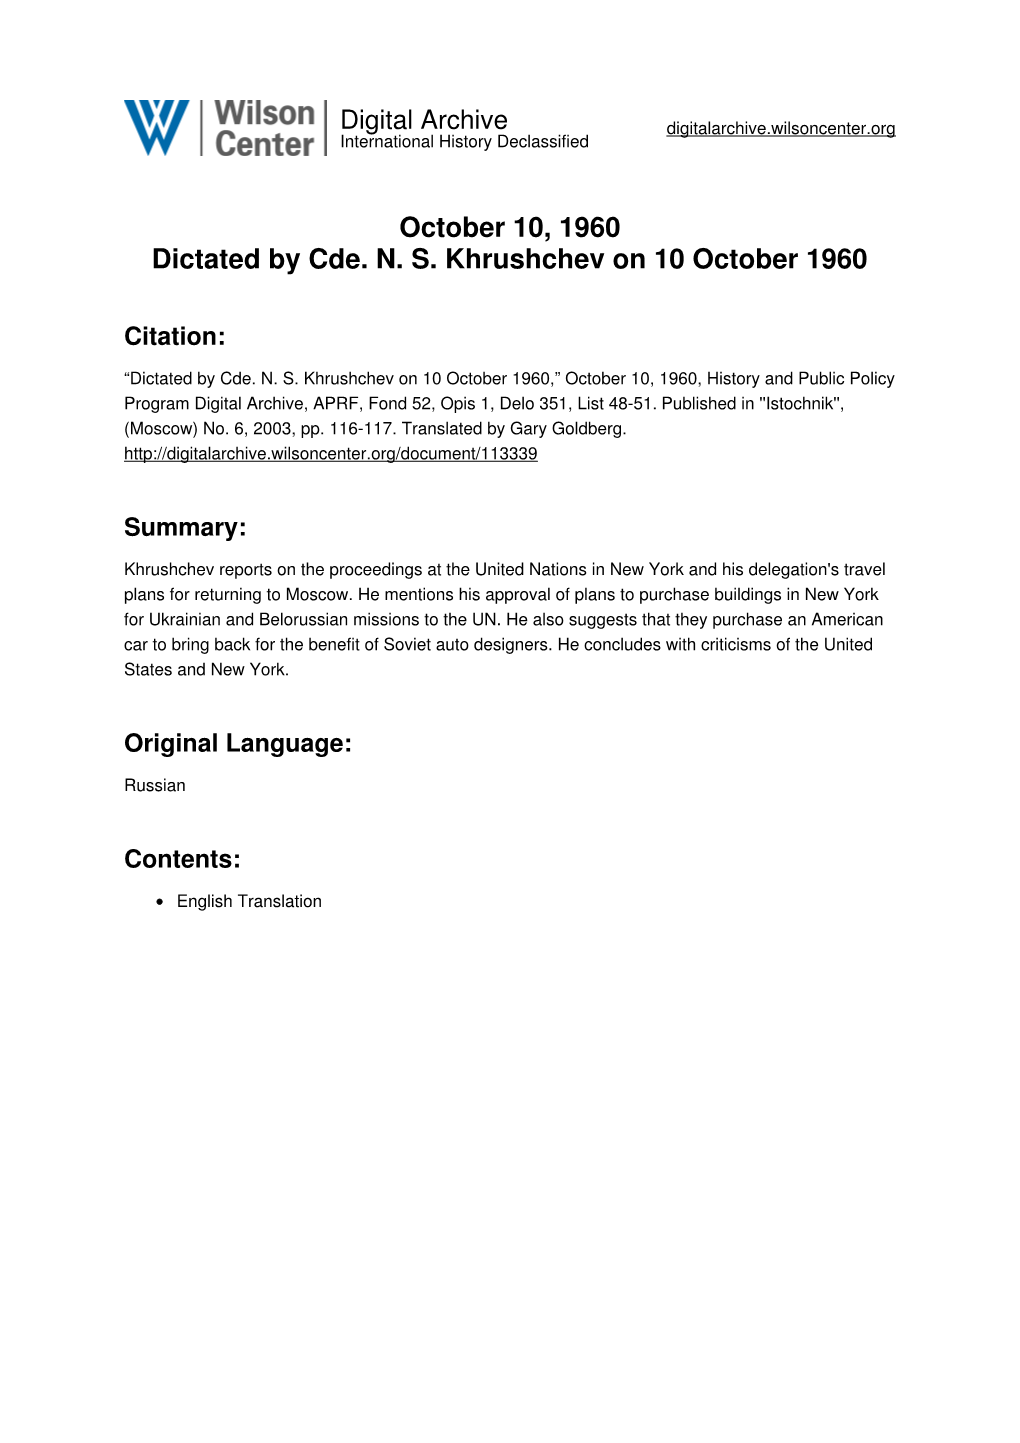 October 10, 1960 Dictated by Cde. N. S. Khrushchev on 10 October 1960